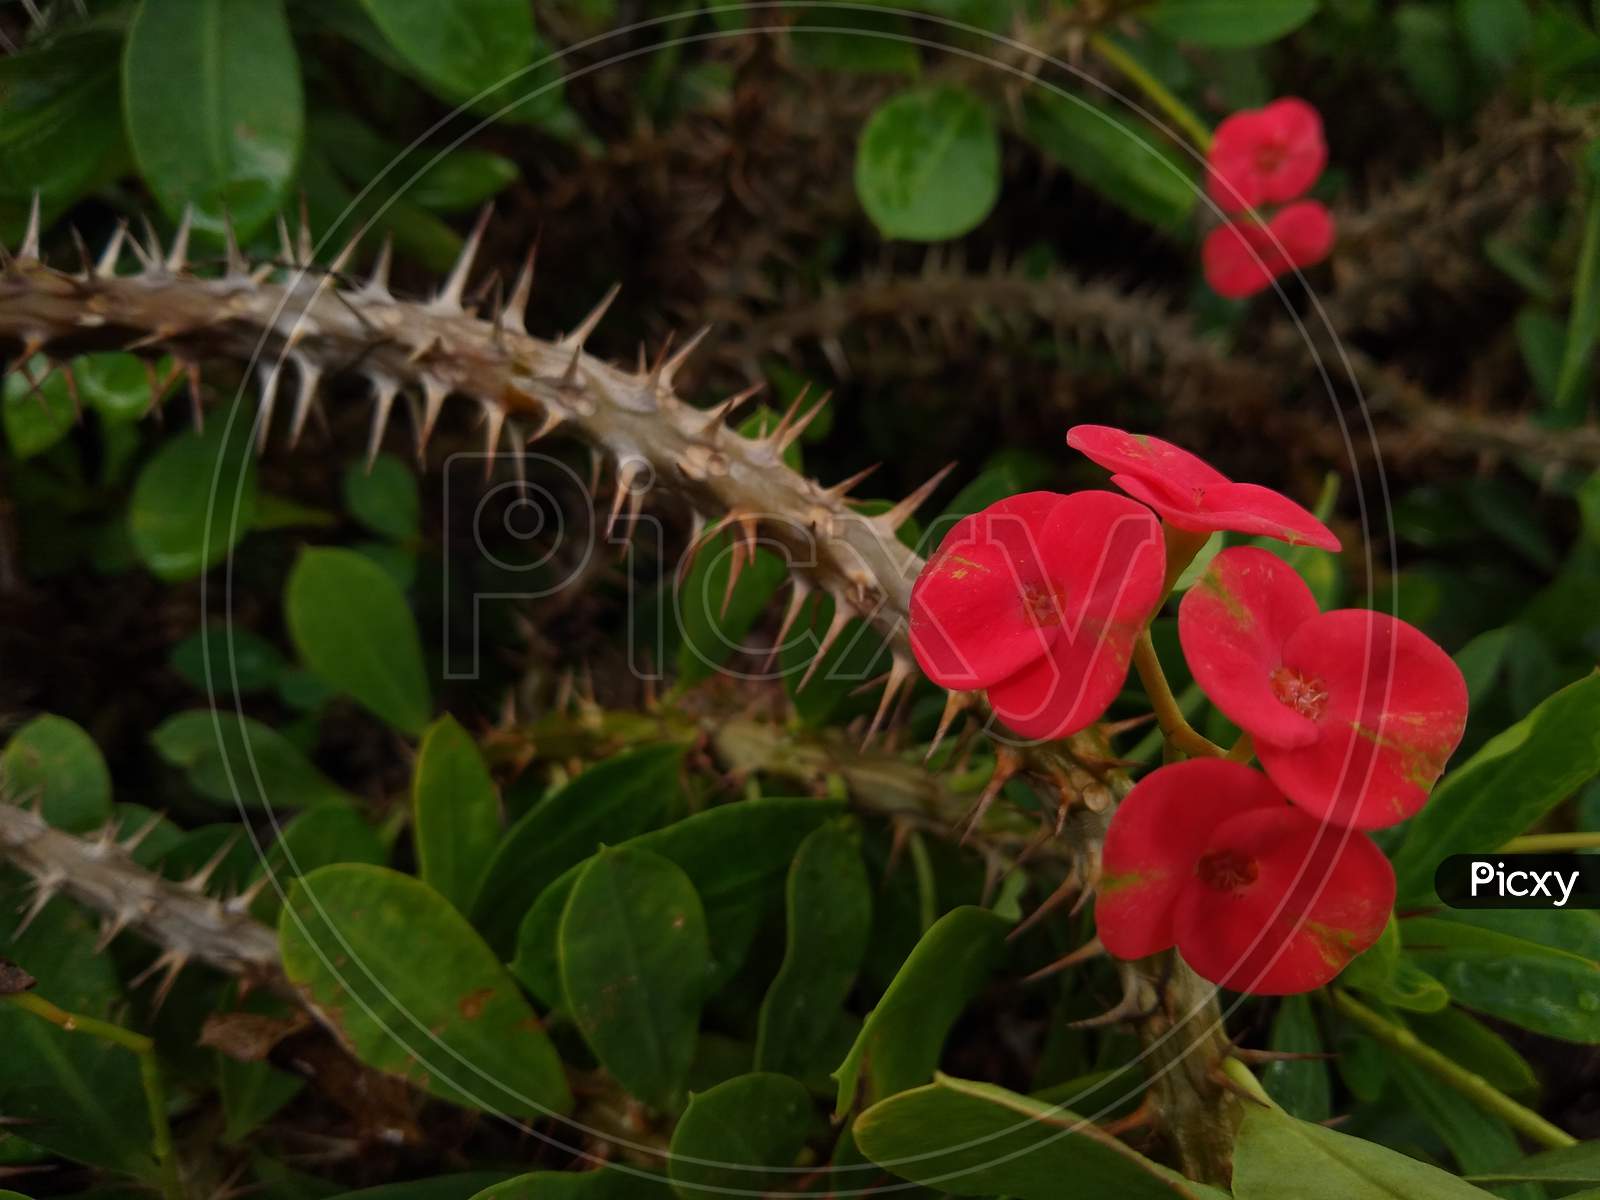 Euphorbia milii (the crown of thorns) plant